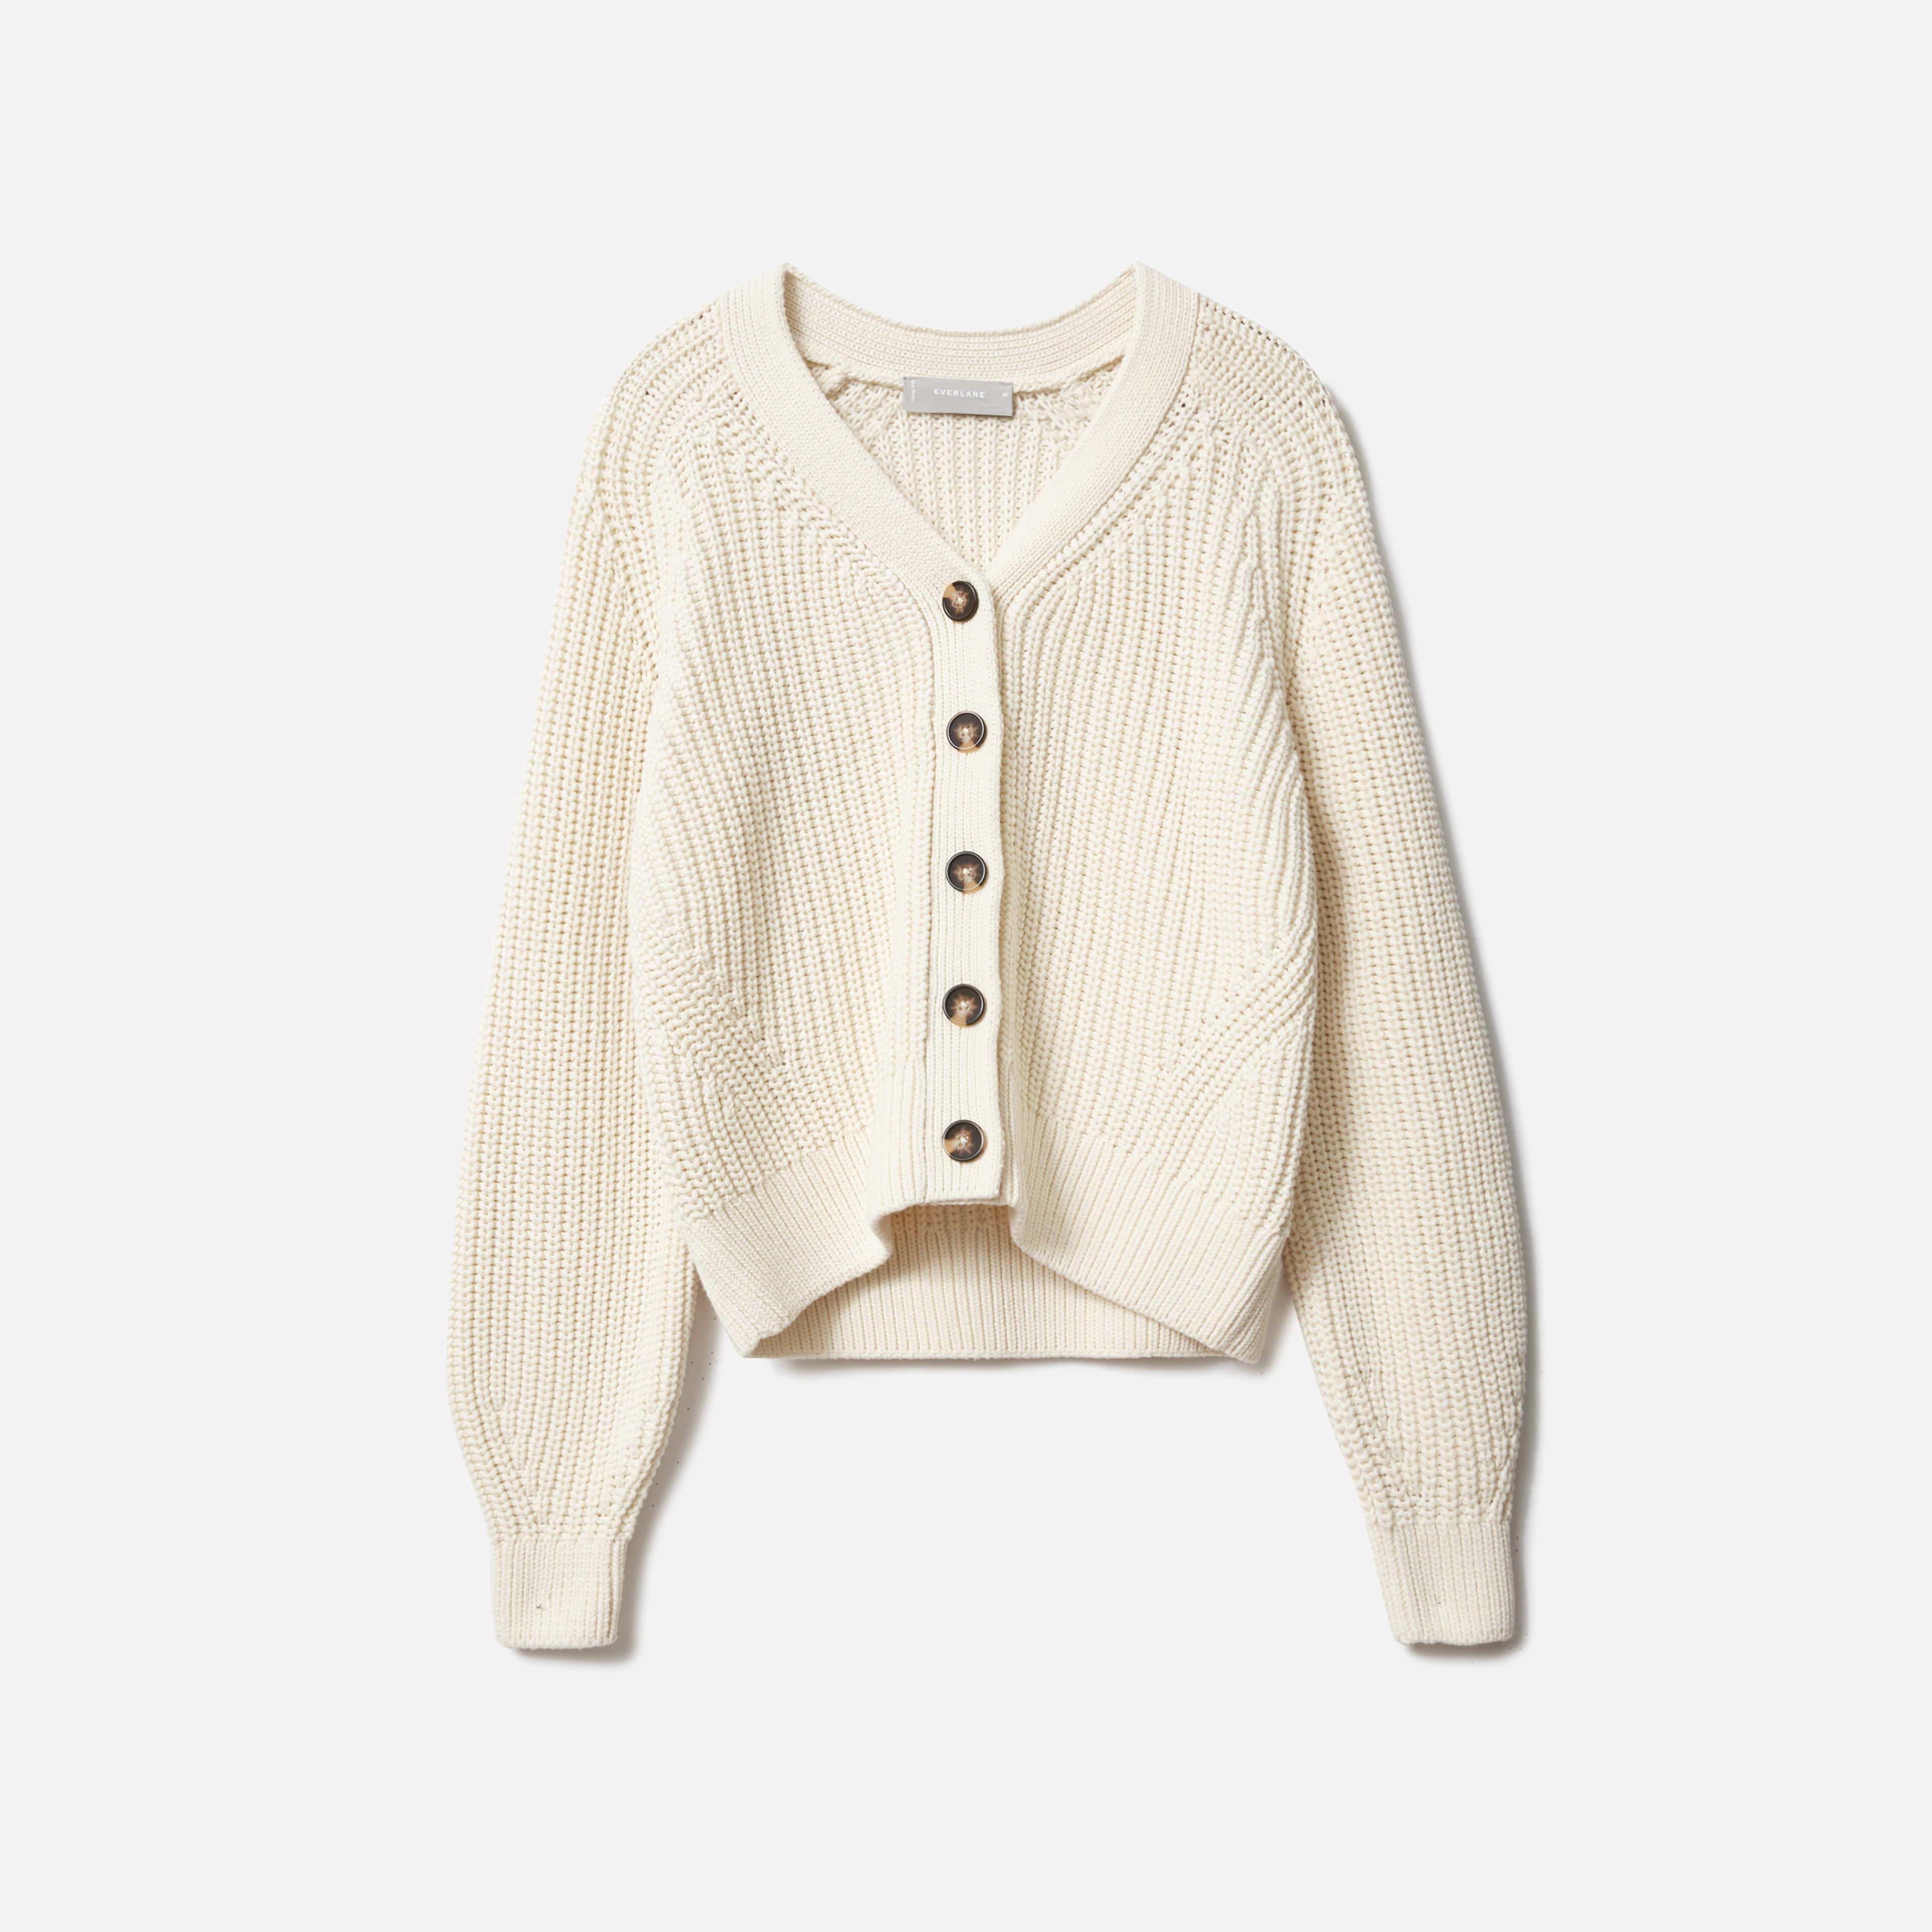 Free ShippingFor U.S. orders over $75 Learn moreFinal SaleNo returns or exchanges. Learn moreSend... | Everlane